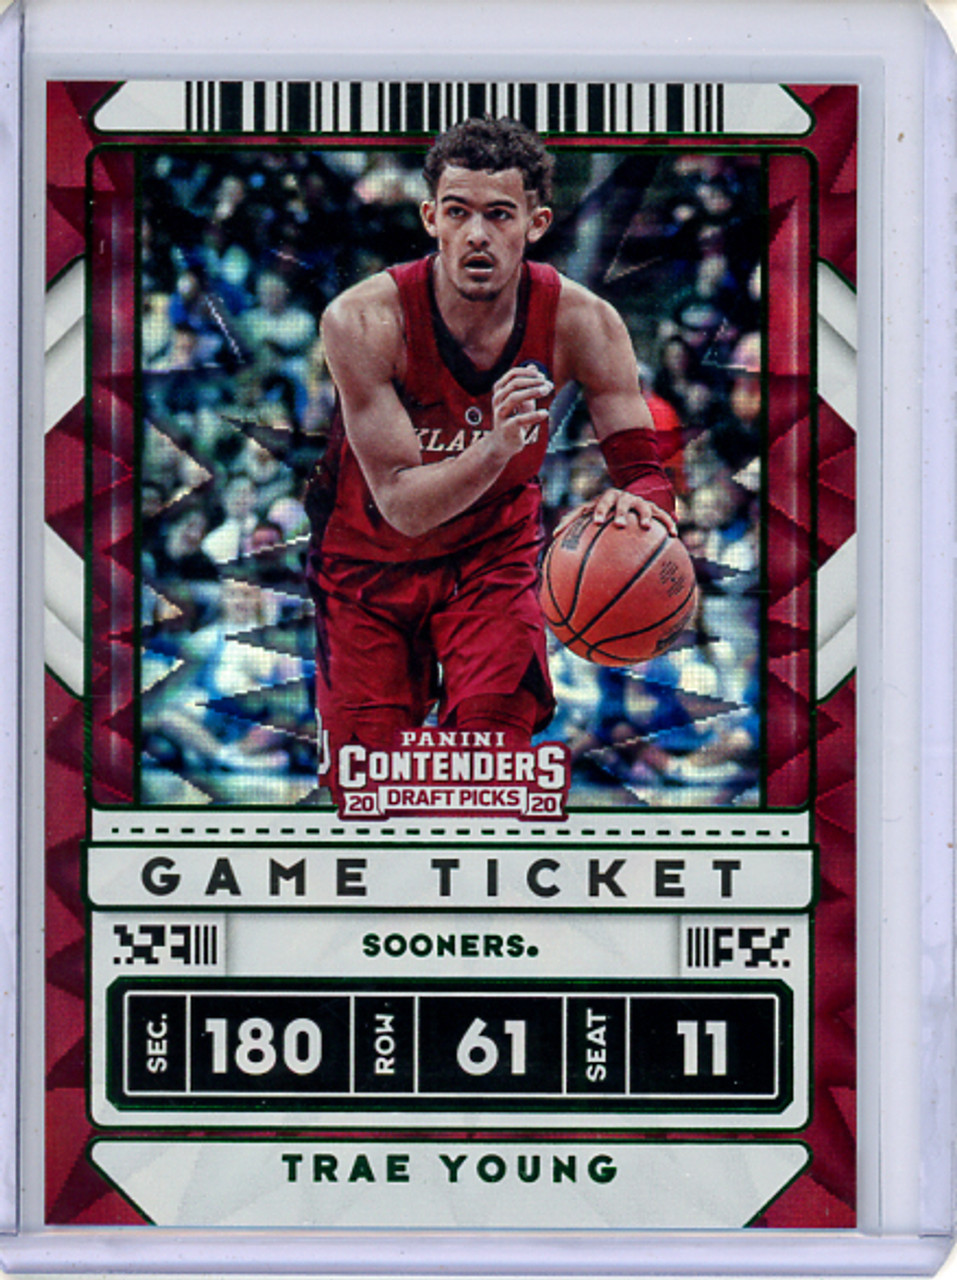 Trae Young 2020-21 Contenders Draft Picks #23 Variations Game Ticket Green Explosion (CQ)